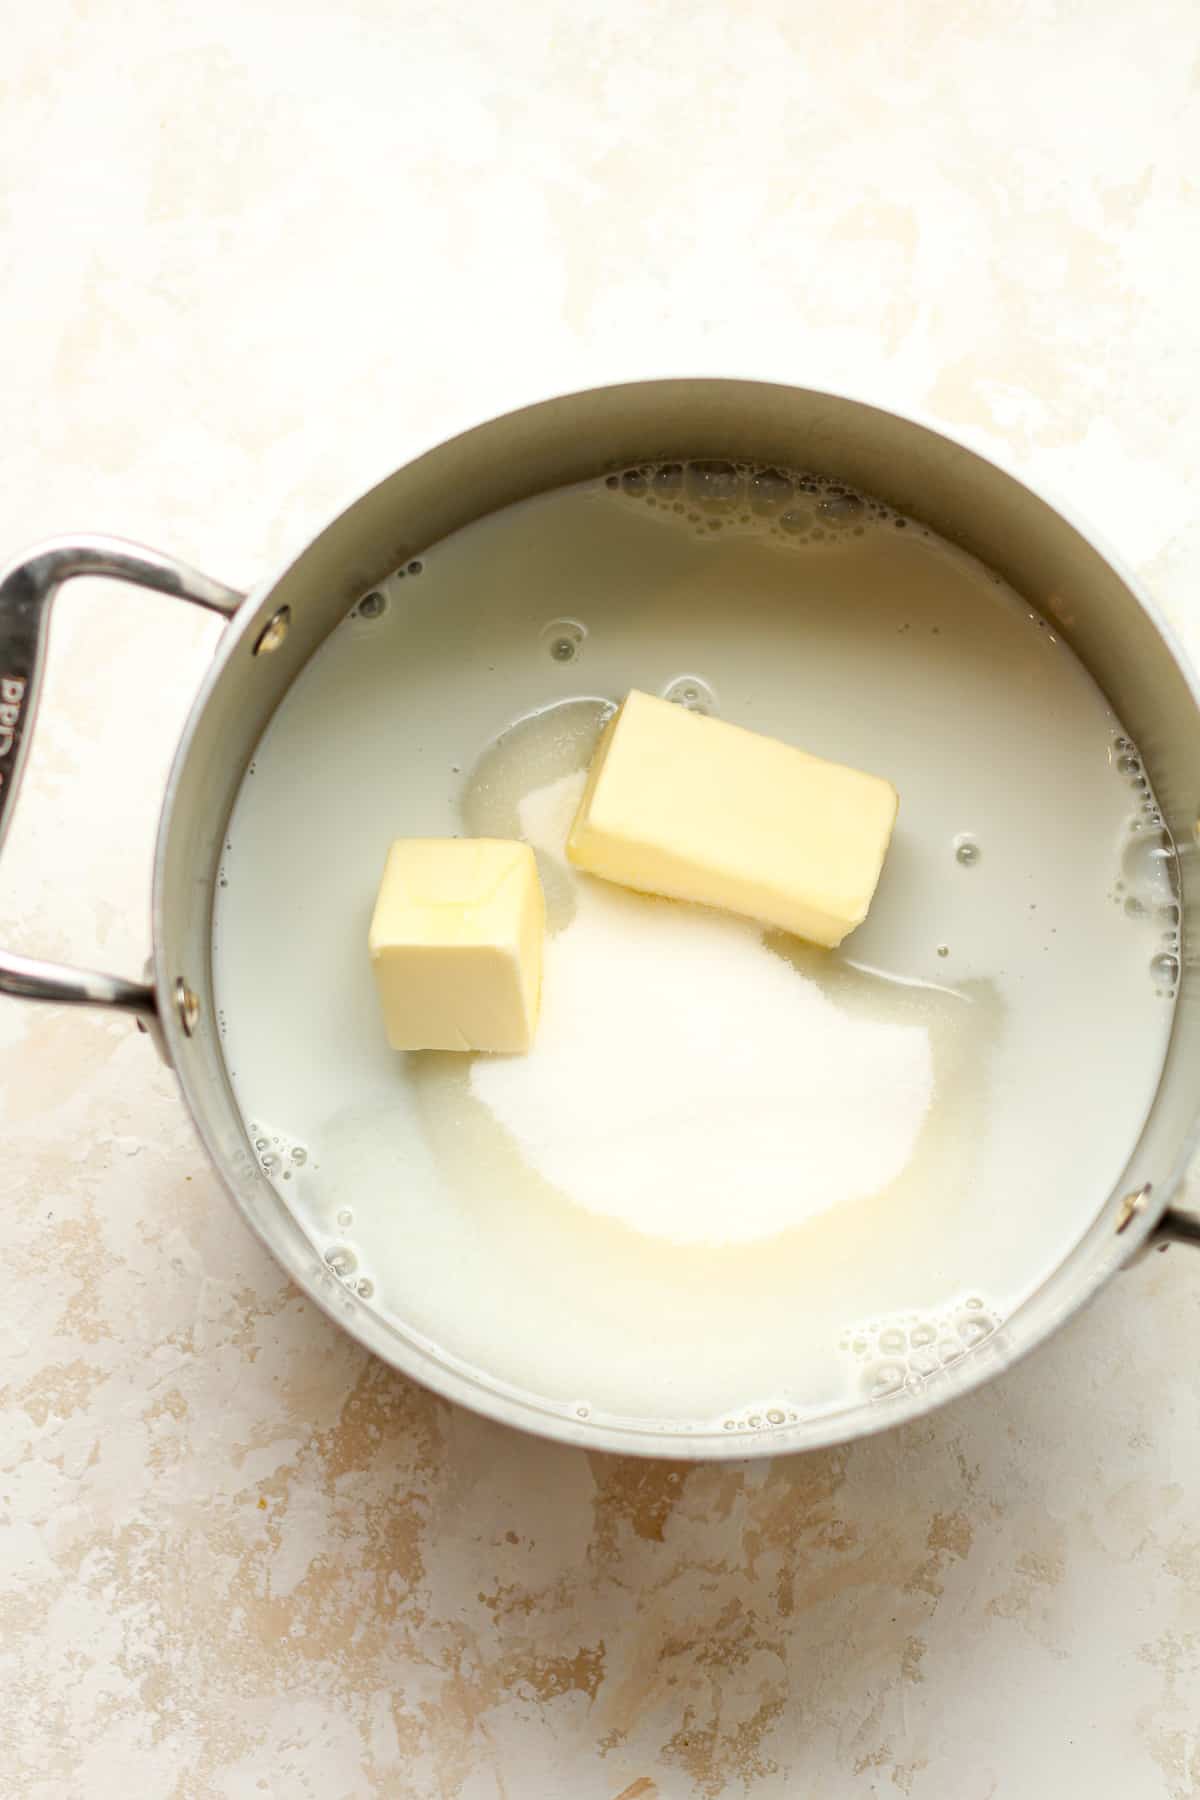 A pan of the milk, butter, and sugar.